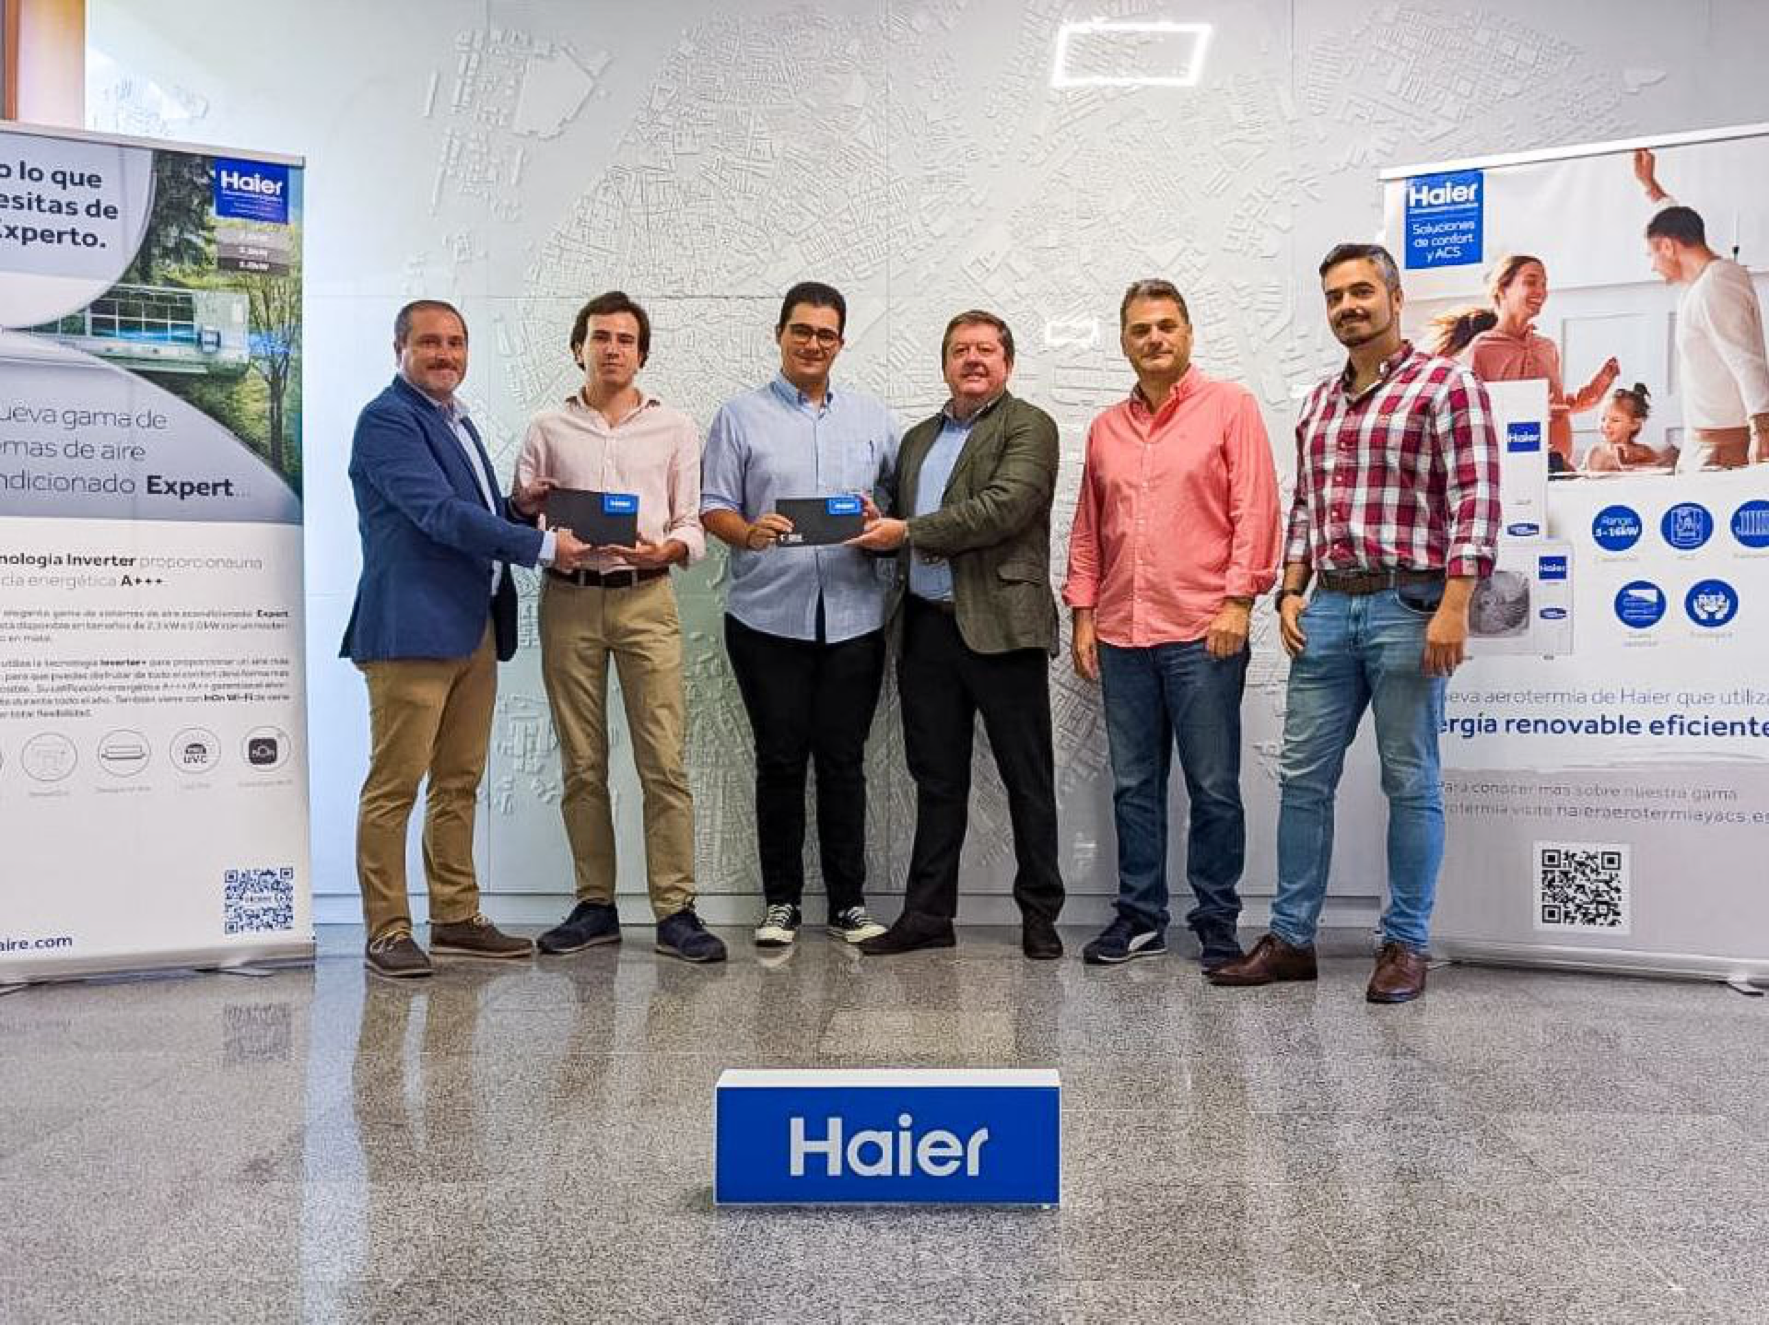 Haier and Soler & Palau stands at the International Workshop on Architecture.